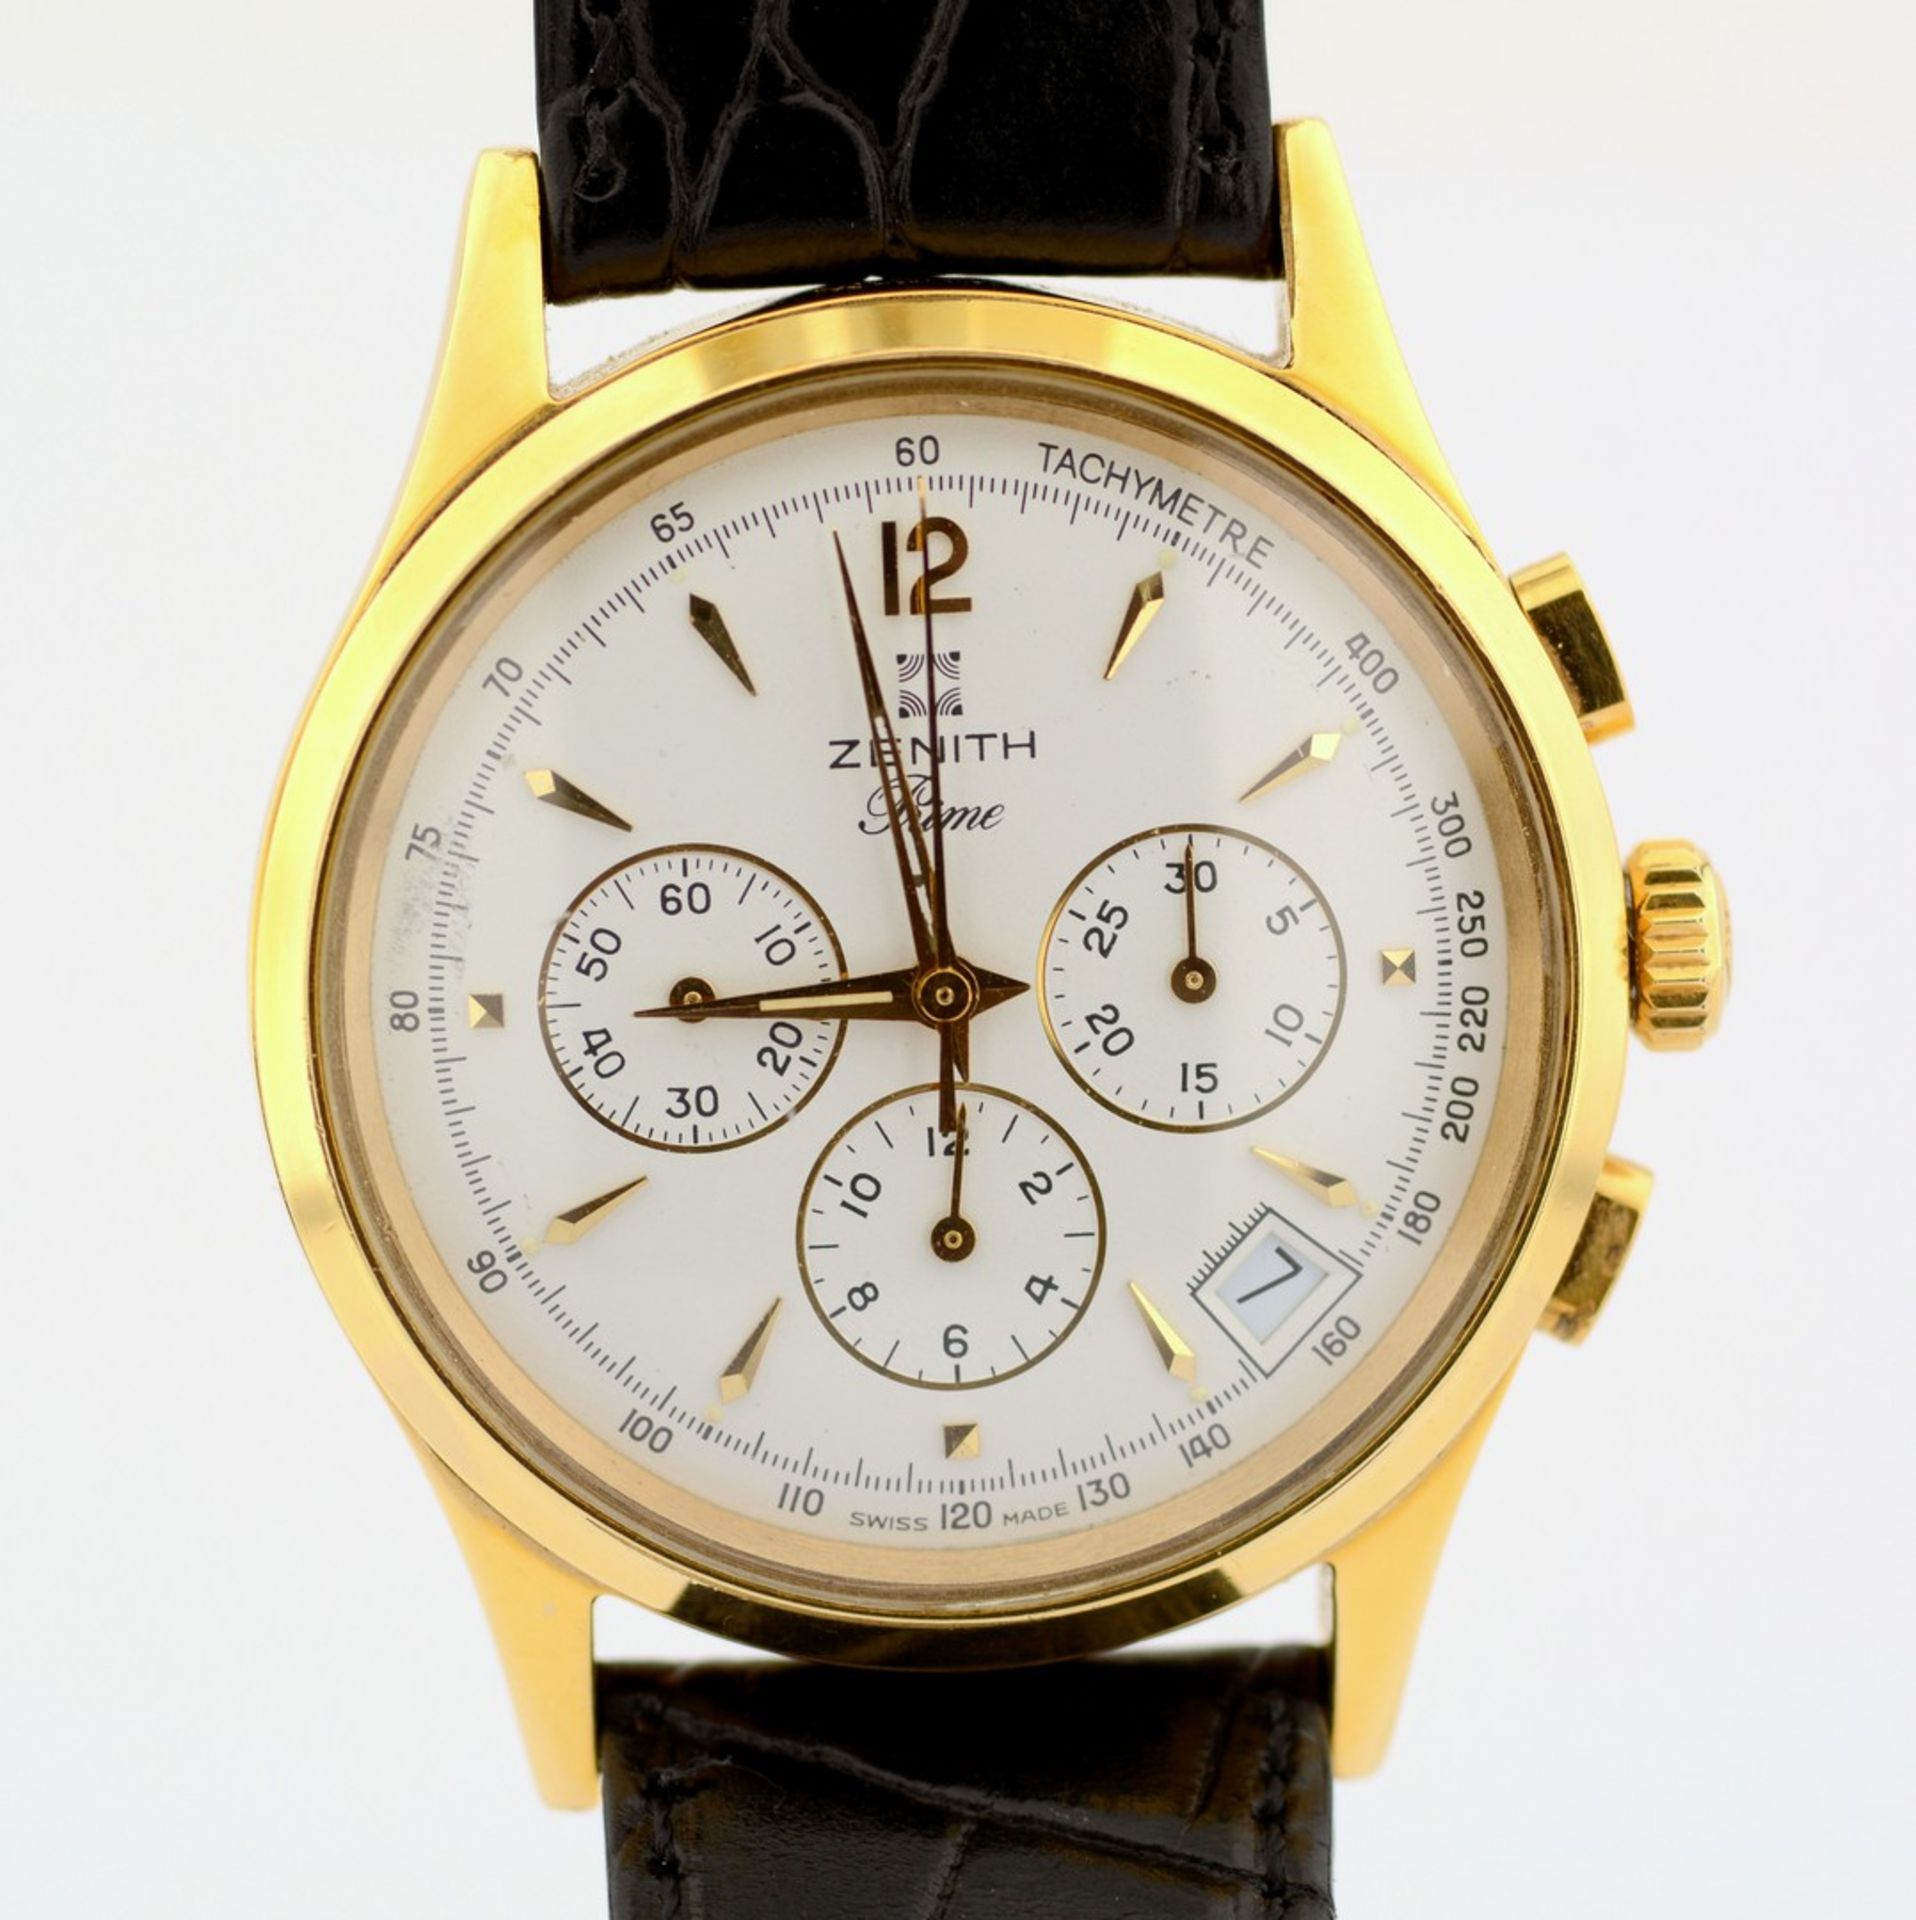 Zenith / Prime Chronograph - Gentlemen's Gold-plated Wristwatch - Image 2 of 8